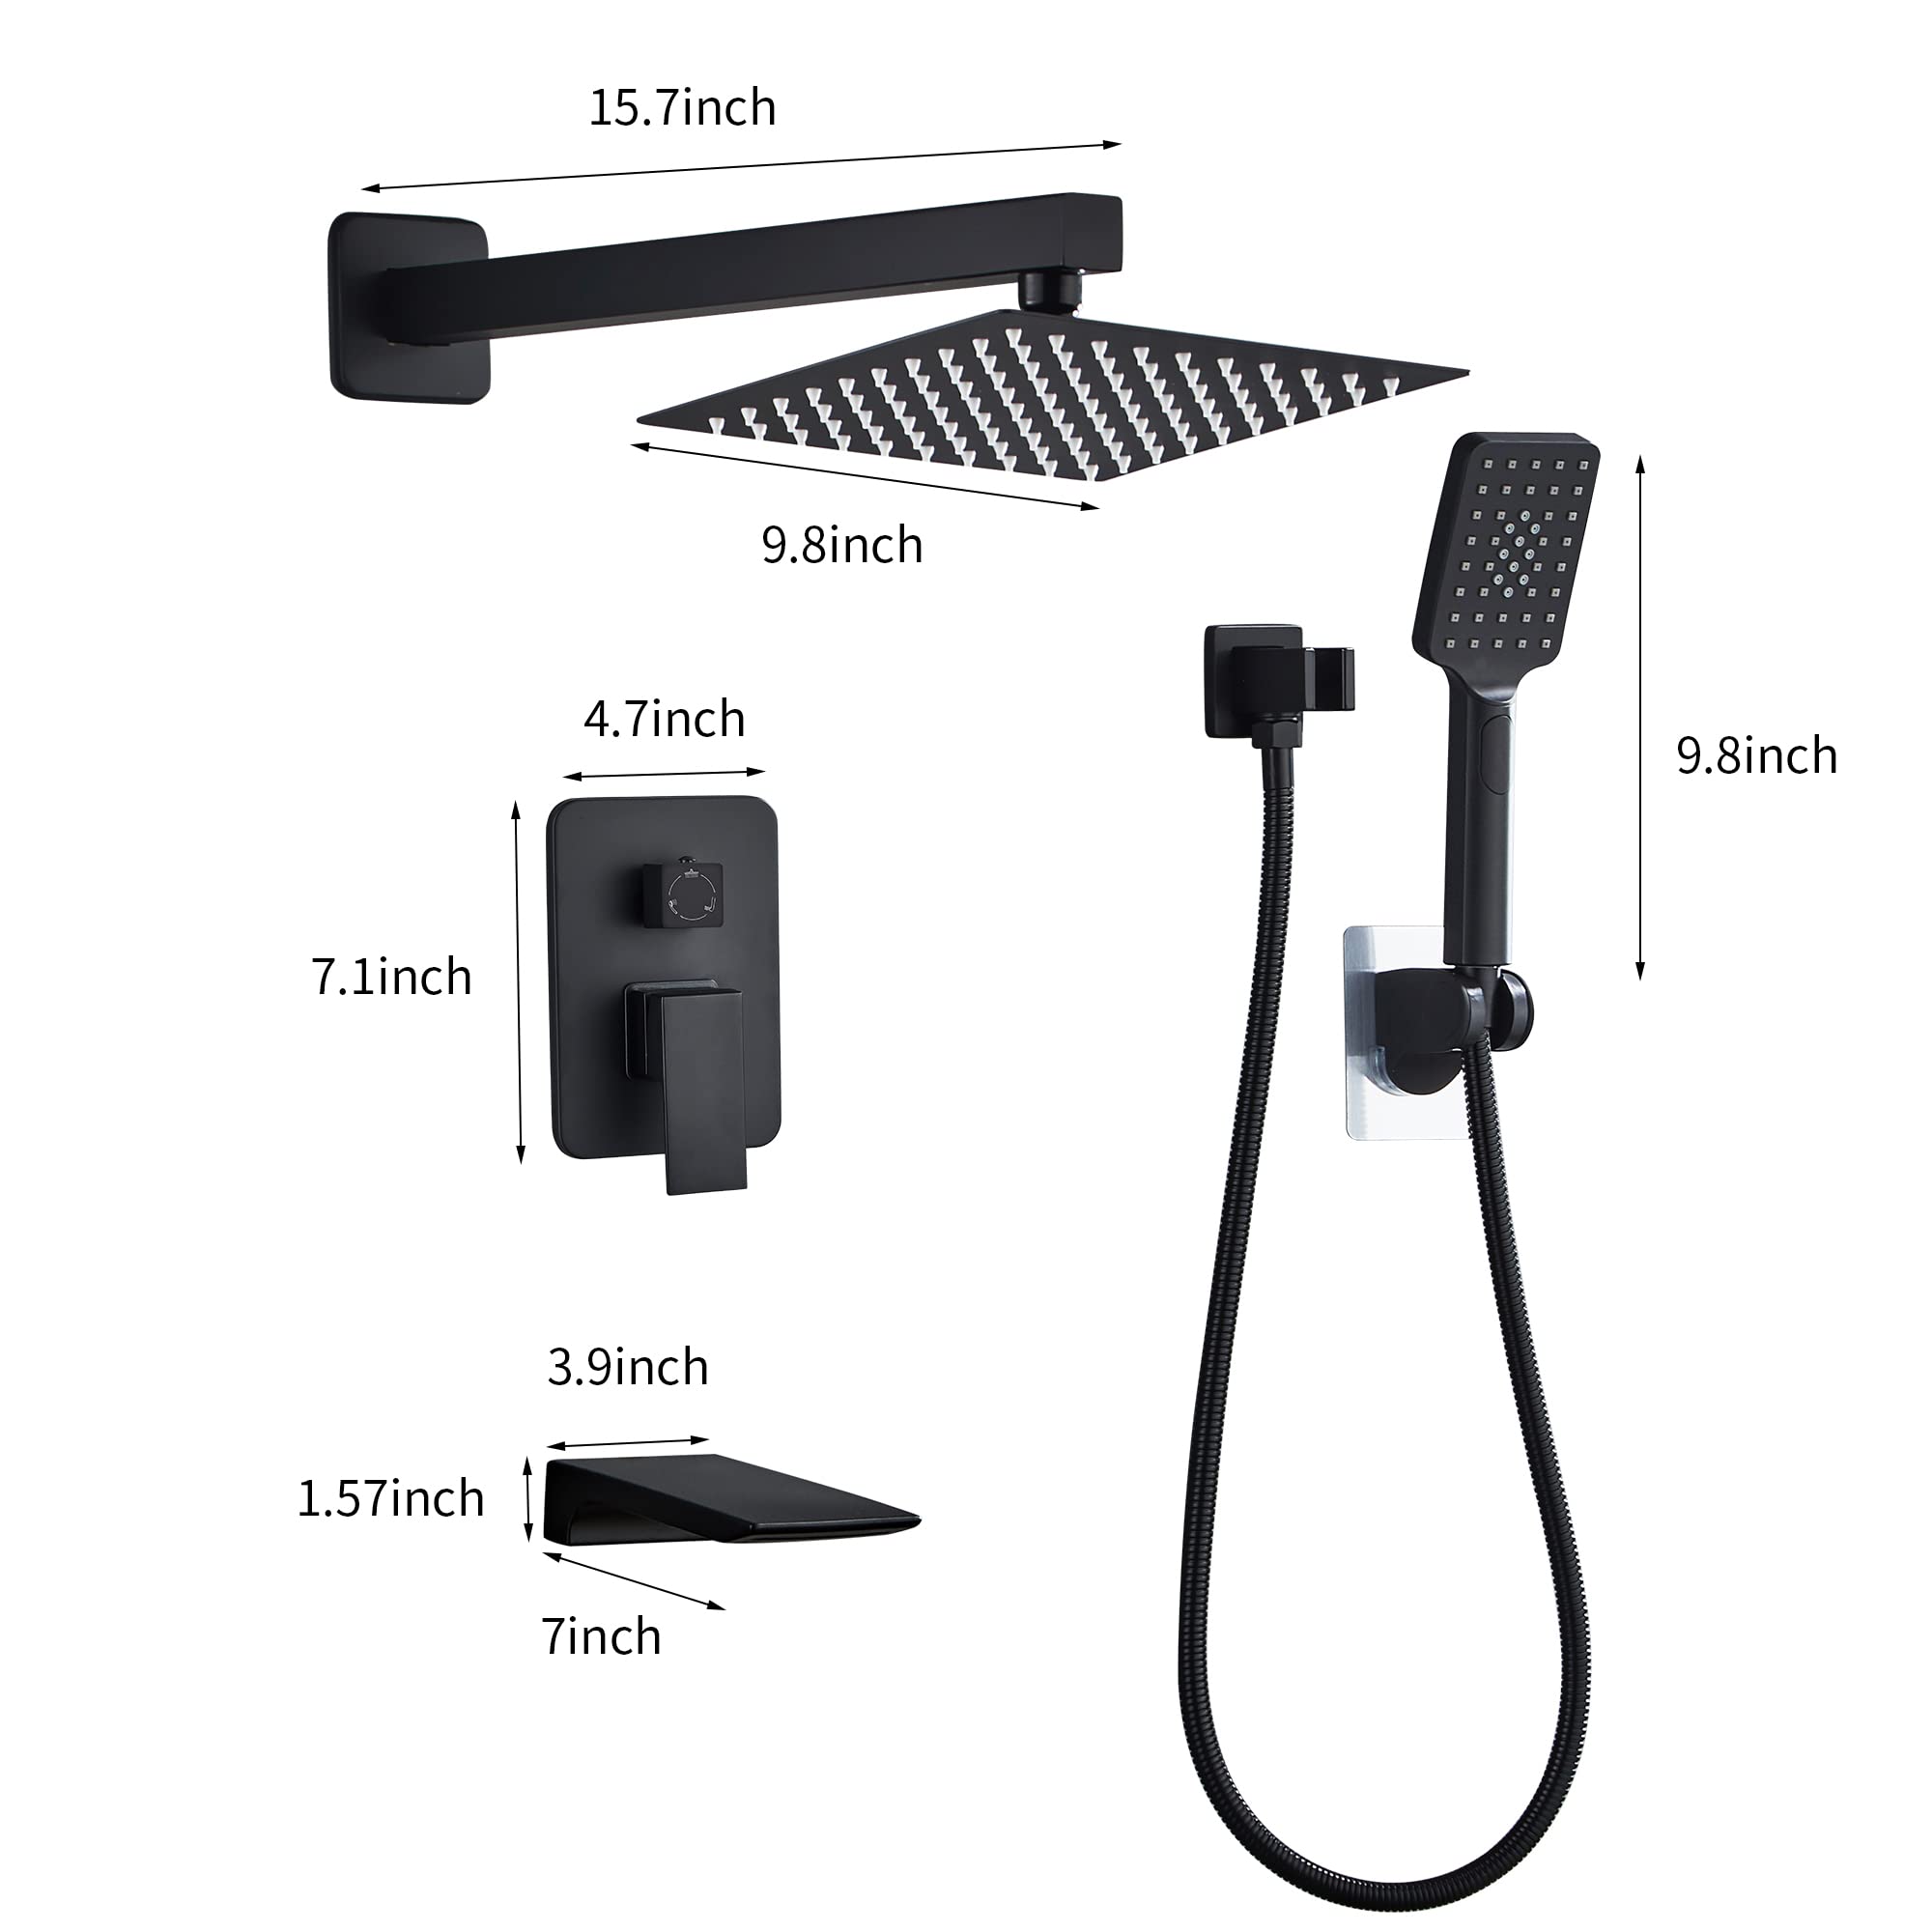 LCEVCGK Shower Faucet Set Complete Matte Black Shower System with 10 inch Square Rainfall Shower Head 3-Function Handheld Shower Waterfall Bathtub Spout Rain Shower Combo Set Bathroom Wall Mounted